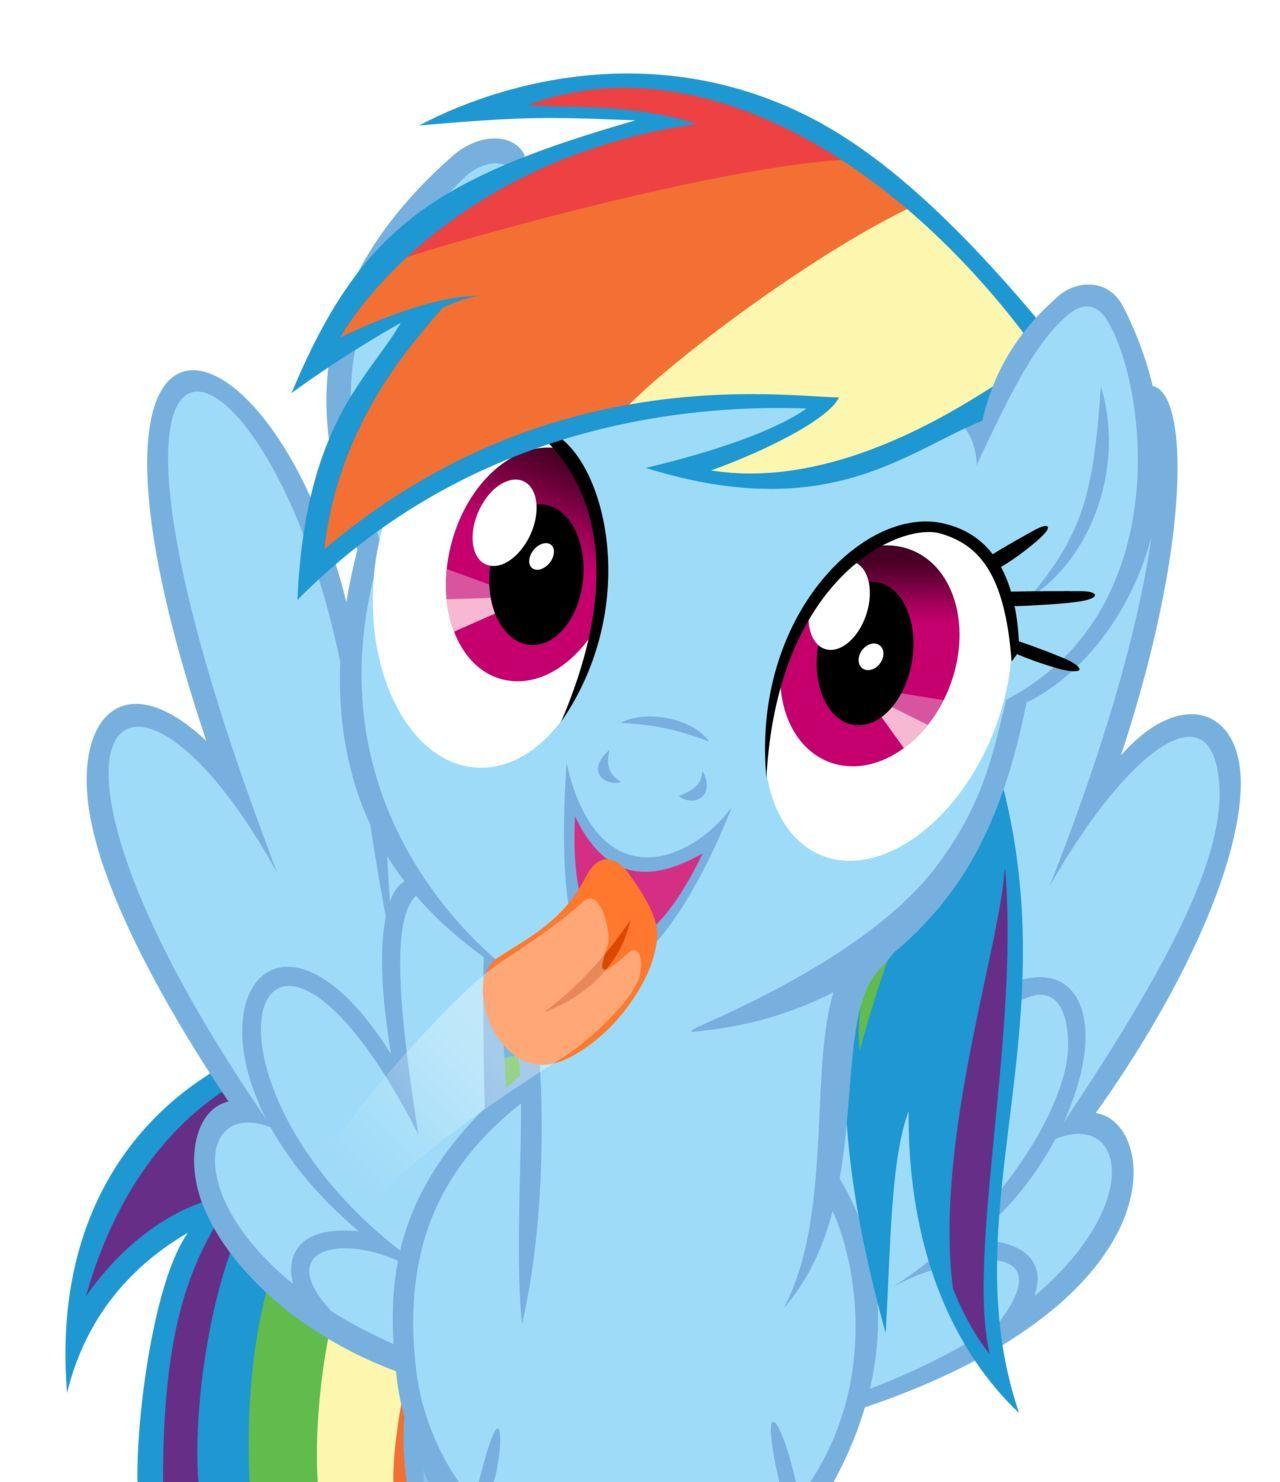 I love that it looks like Rainbow Dash is licking my screen!!! So